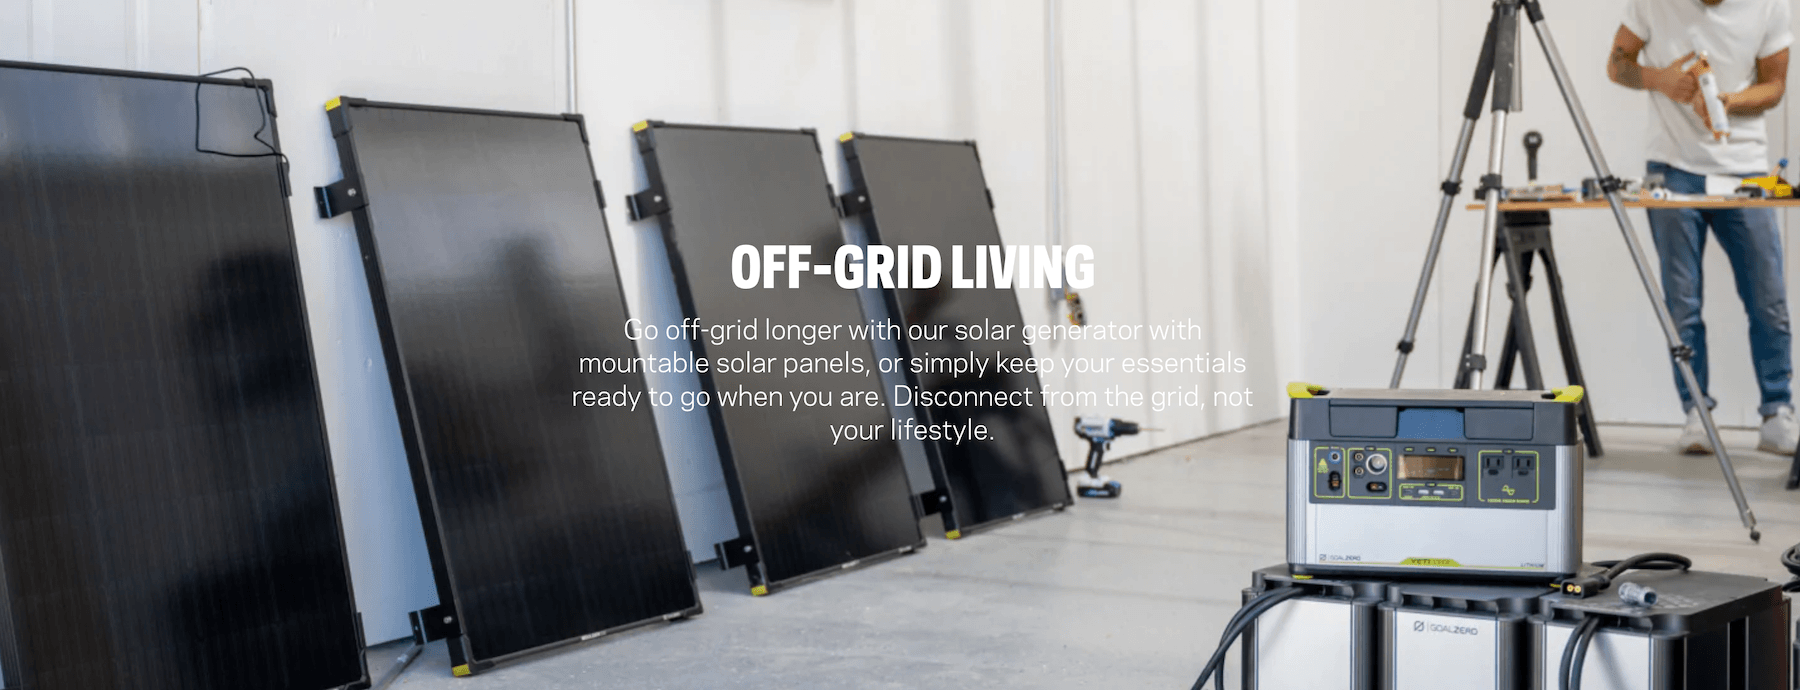 Goal Zero South Africa Off-Grid Living